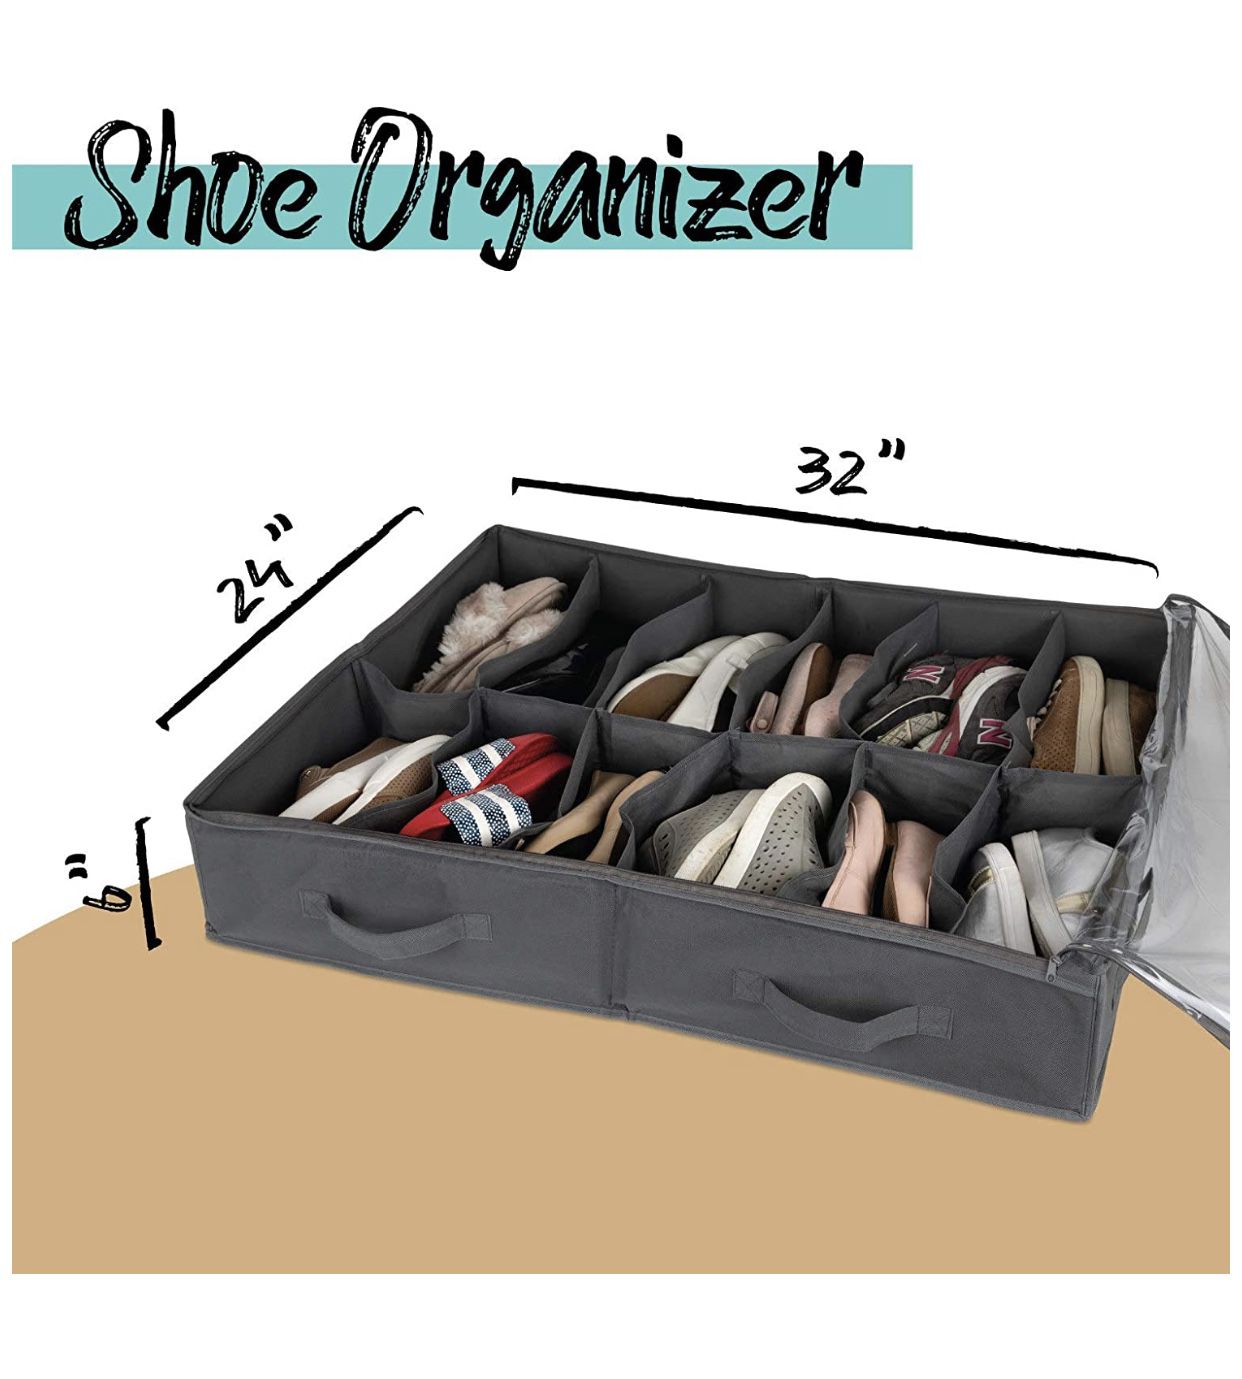 Brand new Under Bed Shoe Storage Organizer -Fits Shoes Up to Size 12-– Sturdy Sides + 12 Inserts for Stiffness - Plastic Zippered Cover –Closet Stora